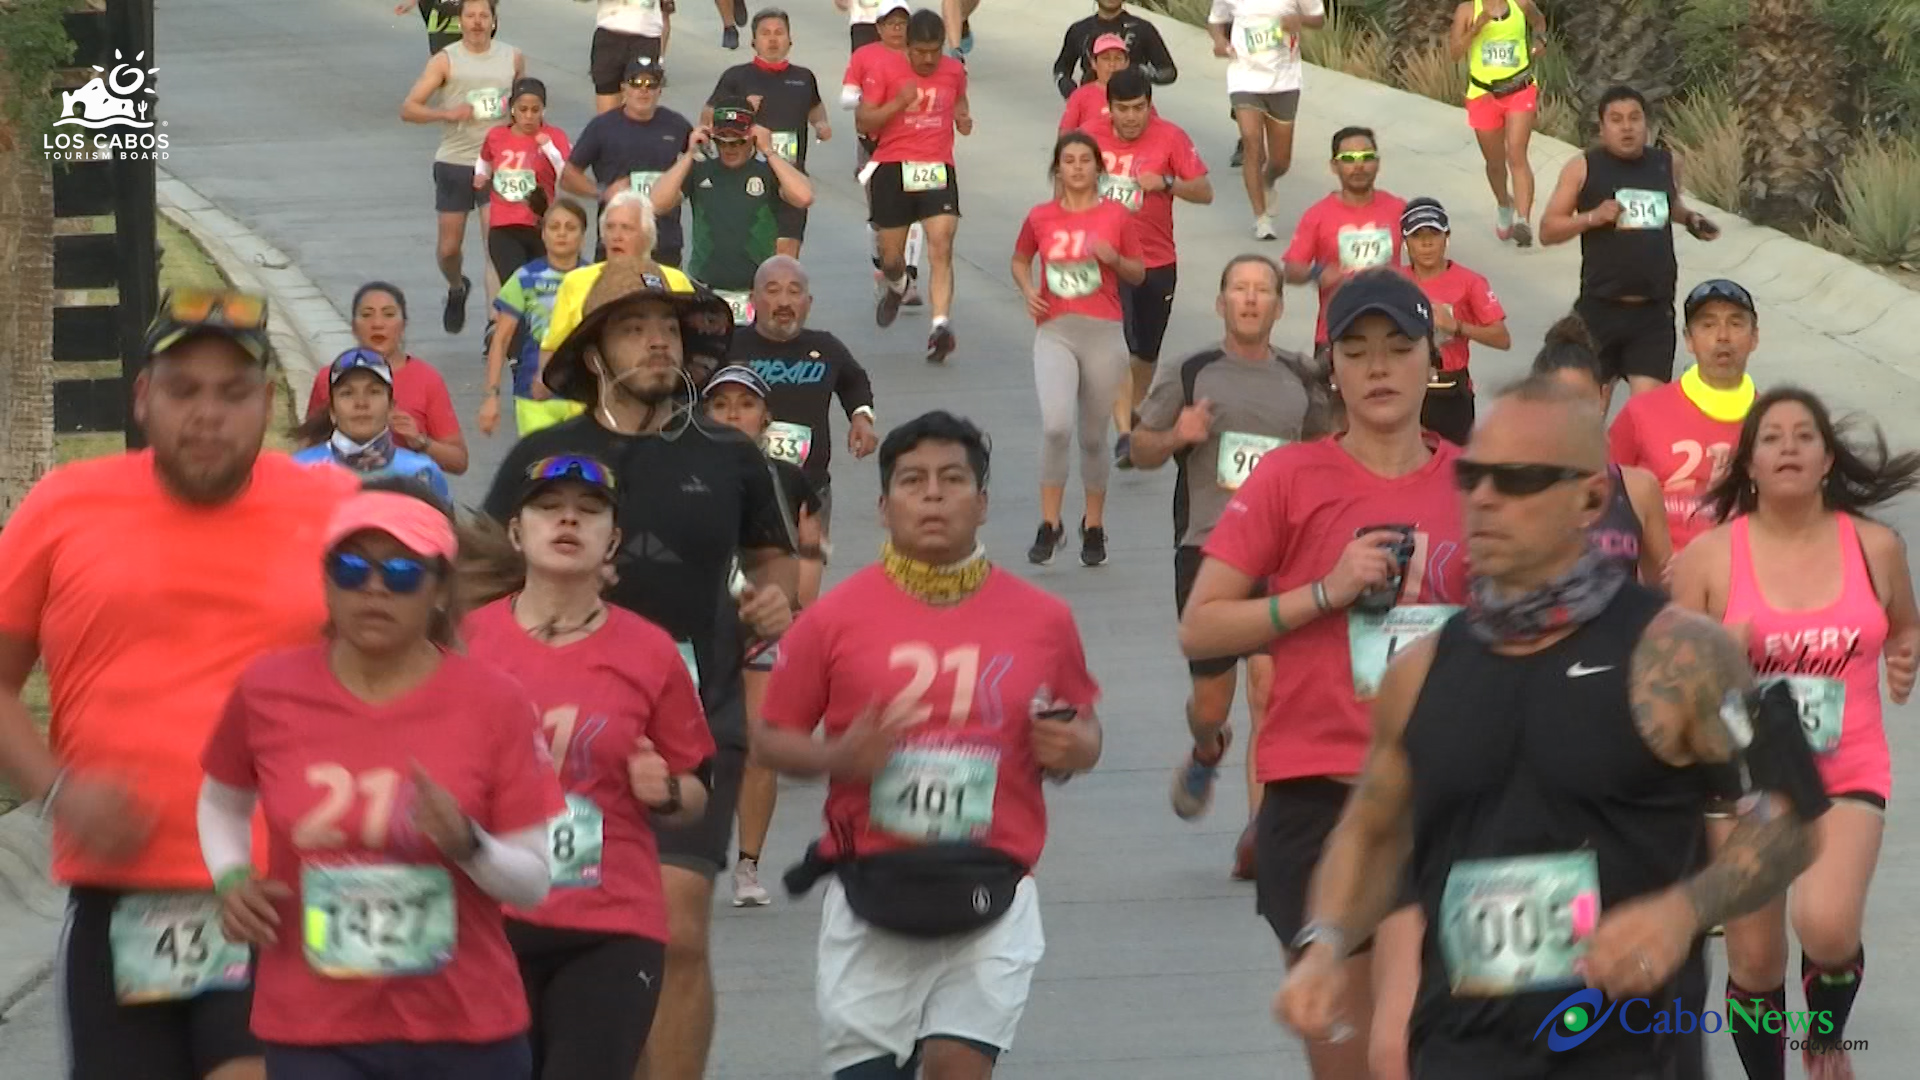 More than 2,000 competed in the Los Cabos Half Marathon Cabo News